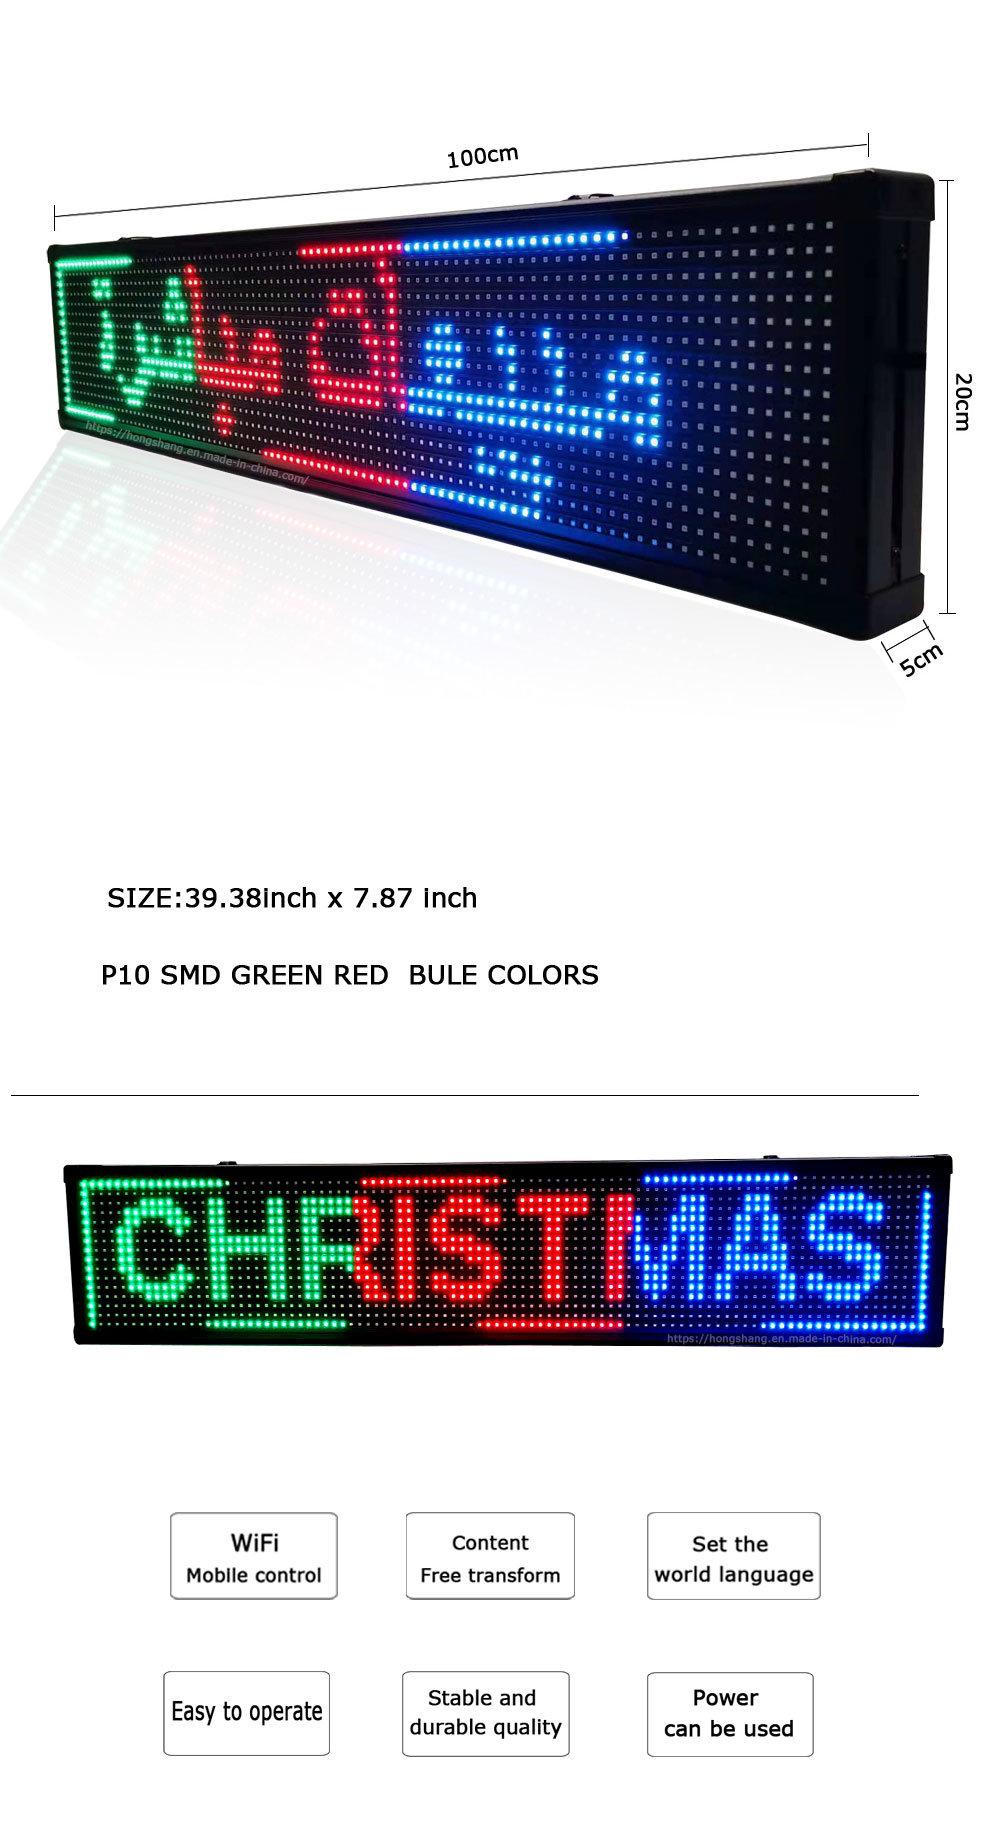 Outdoor LED Ad Player WiFi Send Text Message Display Board